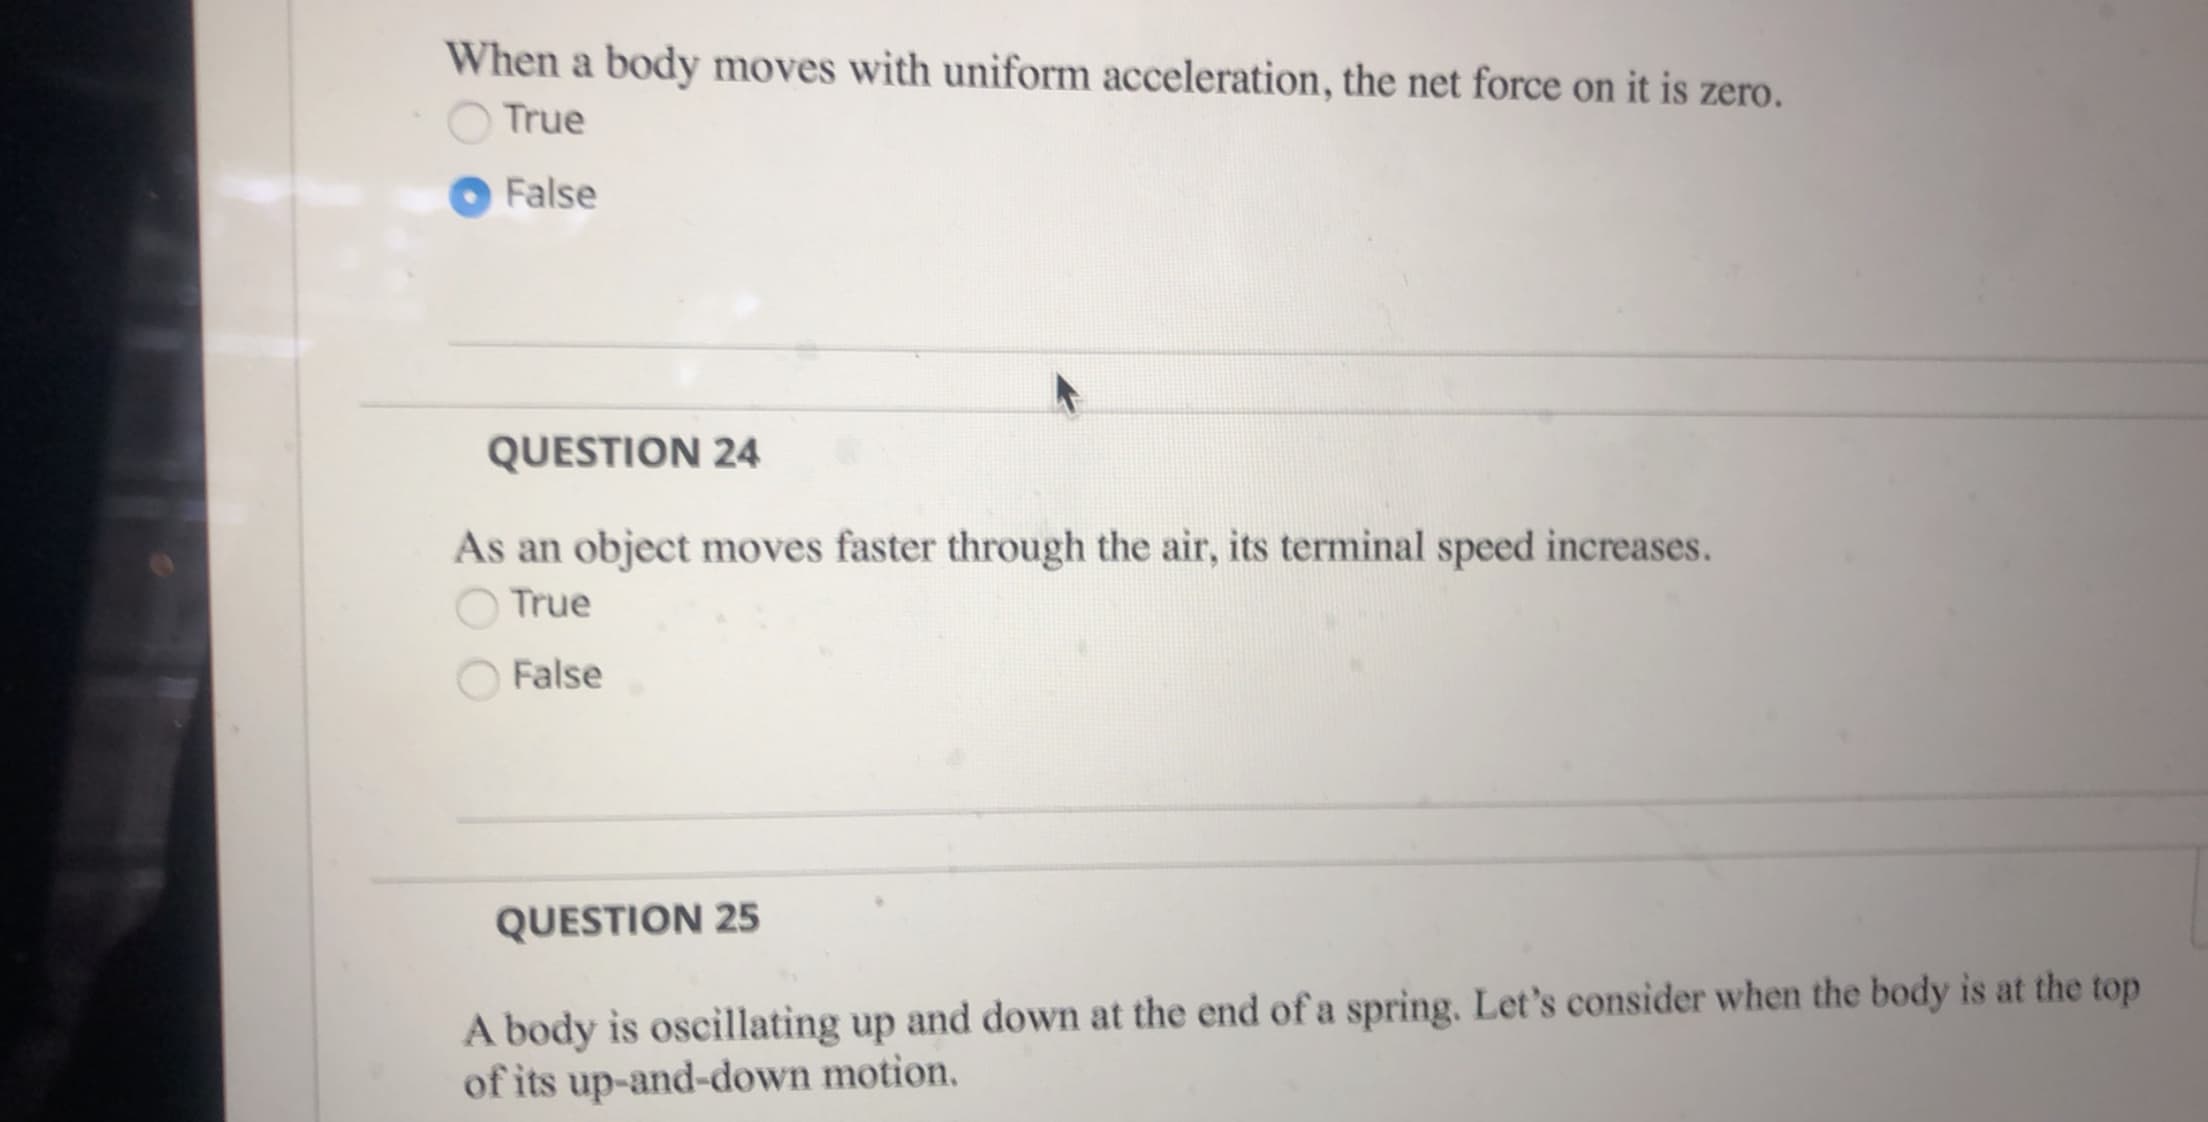 When a body moves with uniform acceleration, the net force on it is zero.
True
False
QUESTION 24
As an object moves faster through the air, its terminal speed increases.
True
False
QUESTION 25
A body is oscillating up and down at the end of a spring. Let's consider when the body is at the top
of its up-and-down motion.
